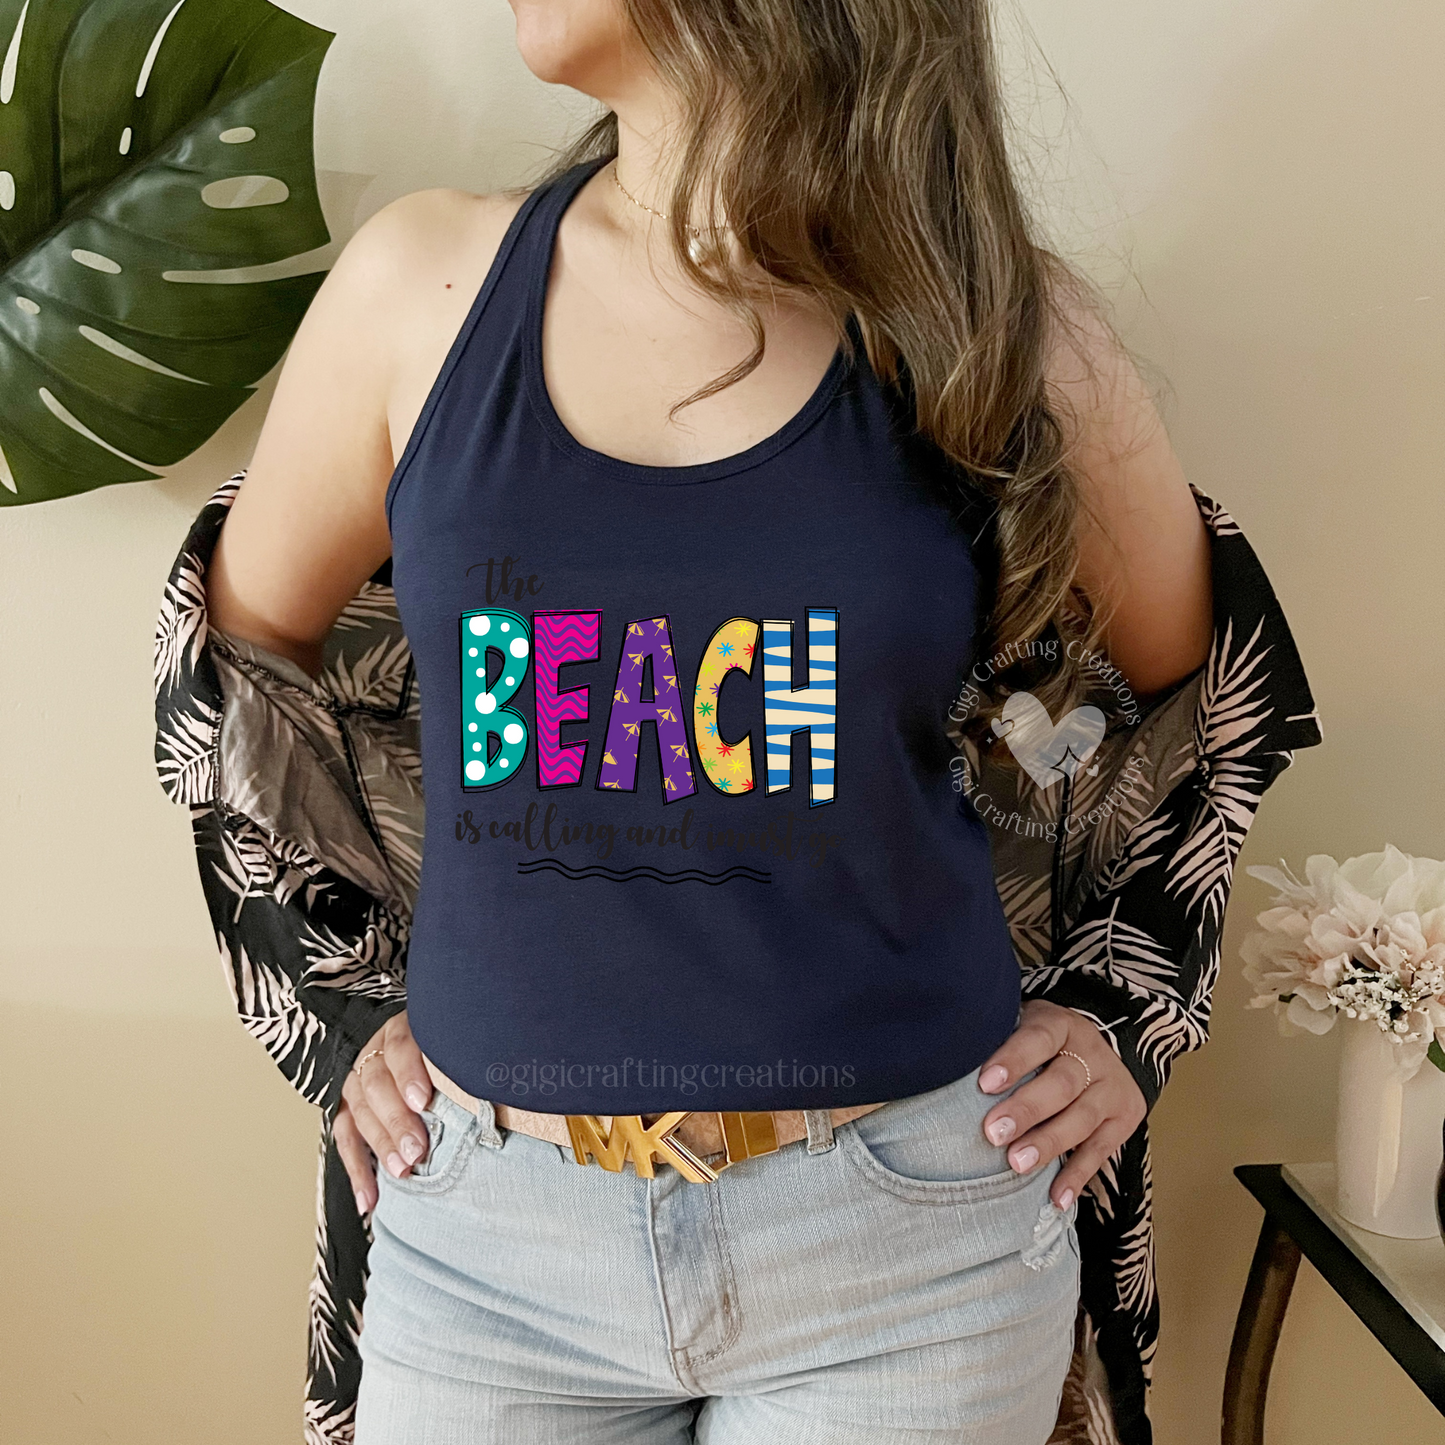 The Beach is Calling Tank Top